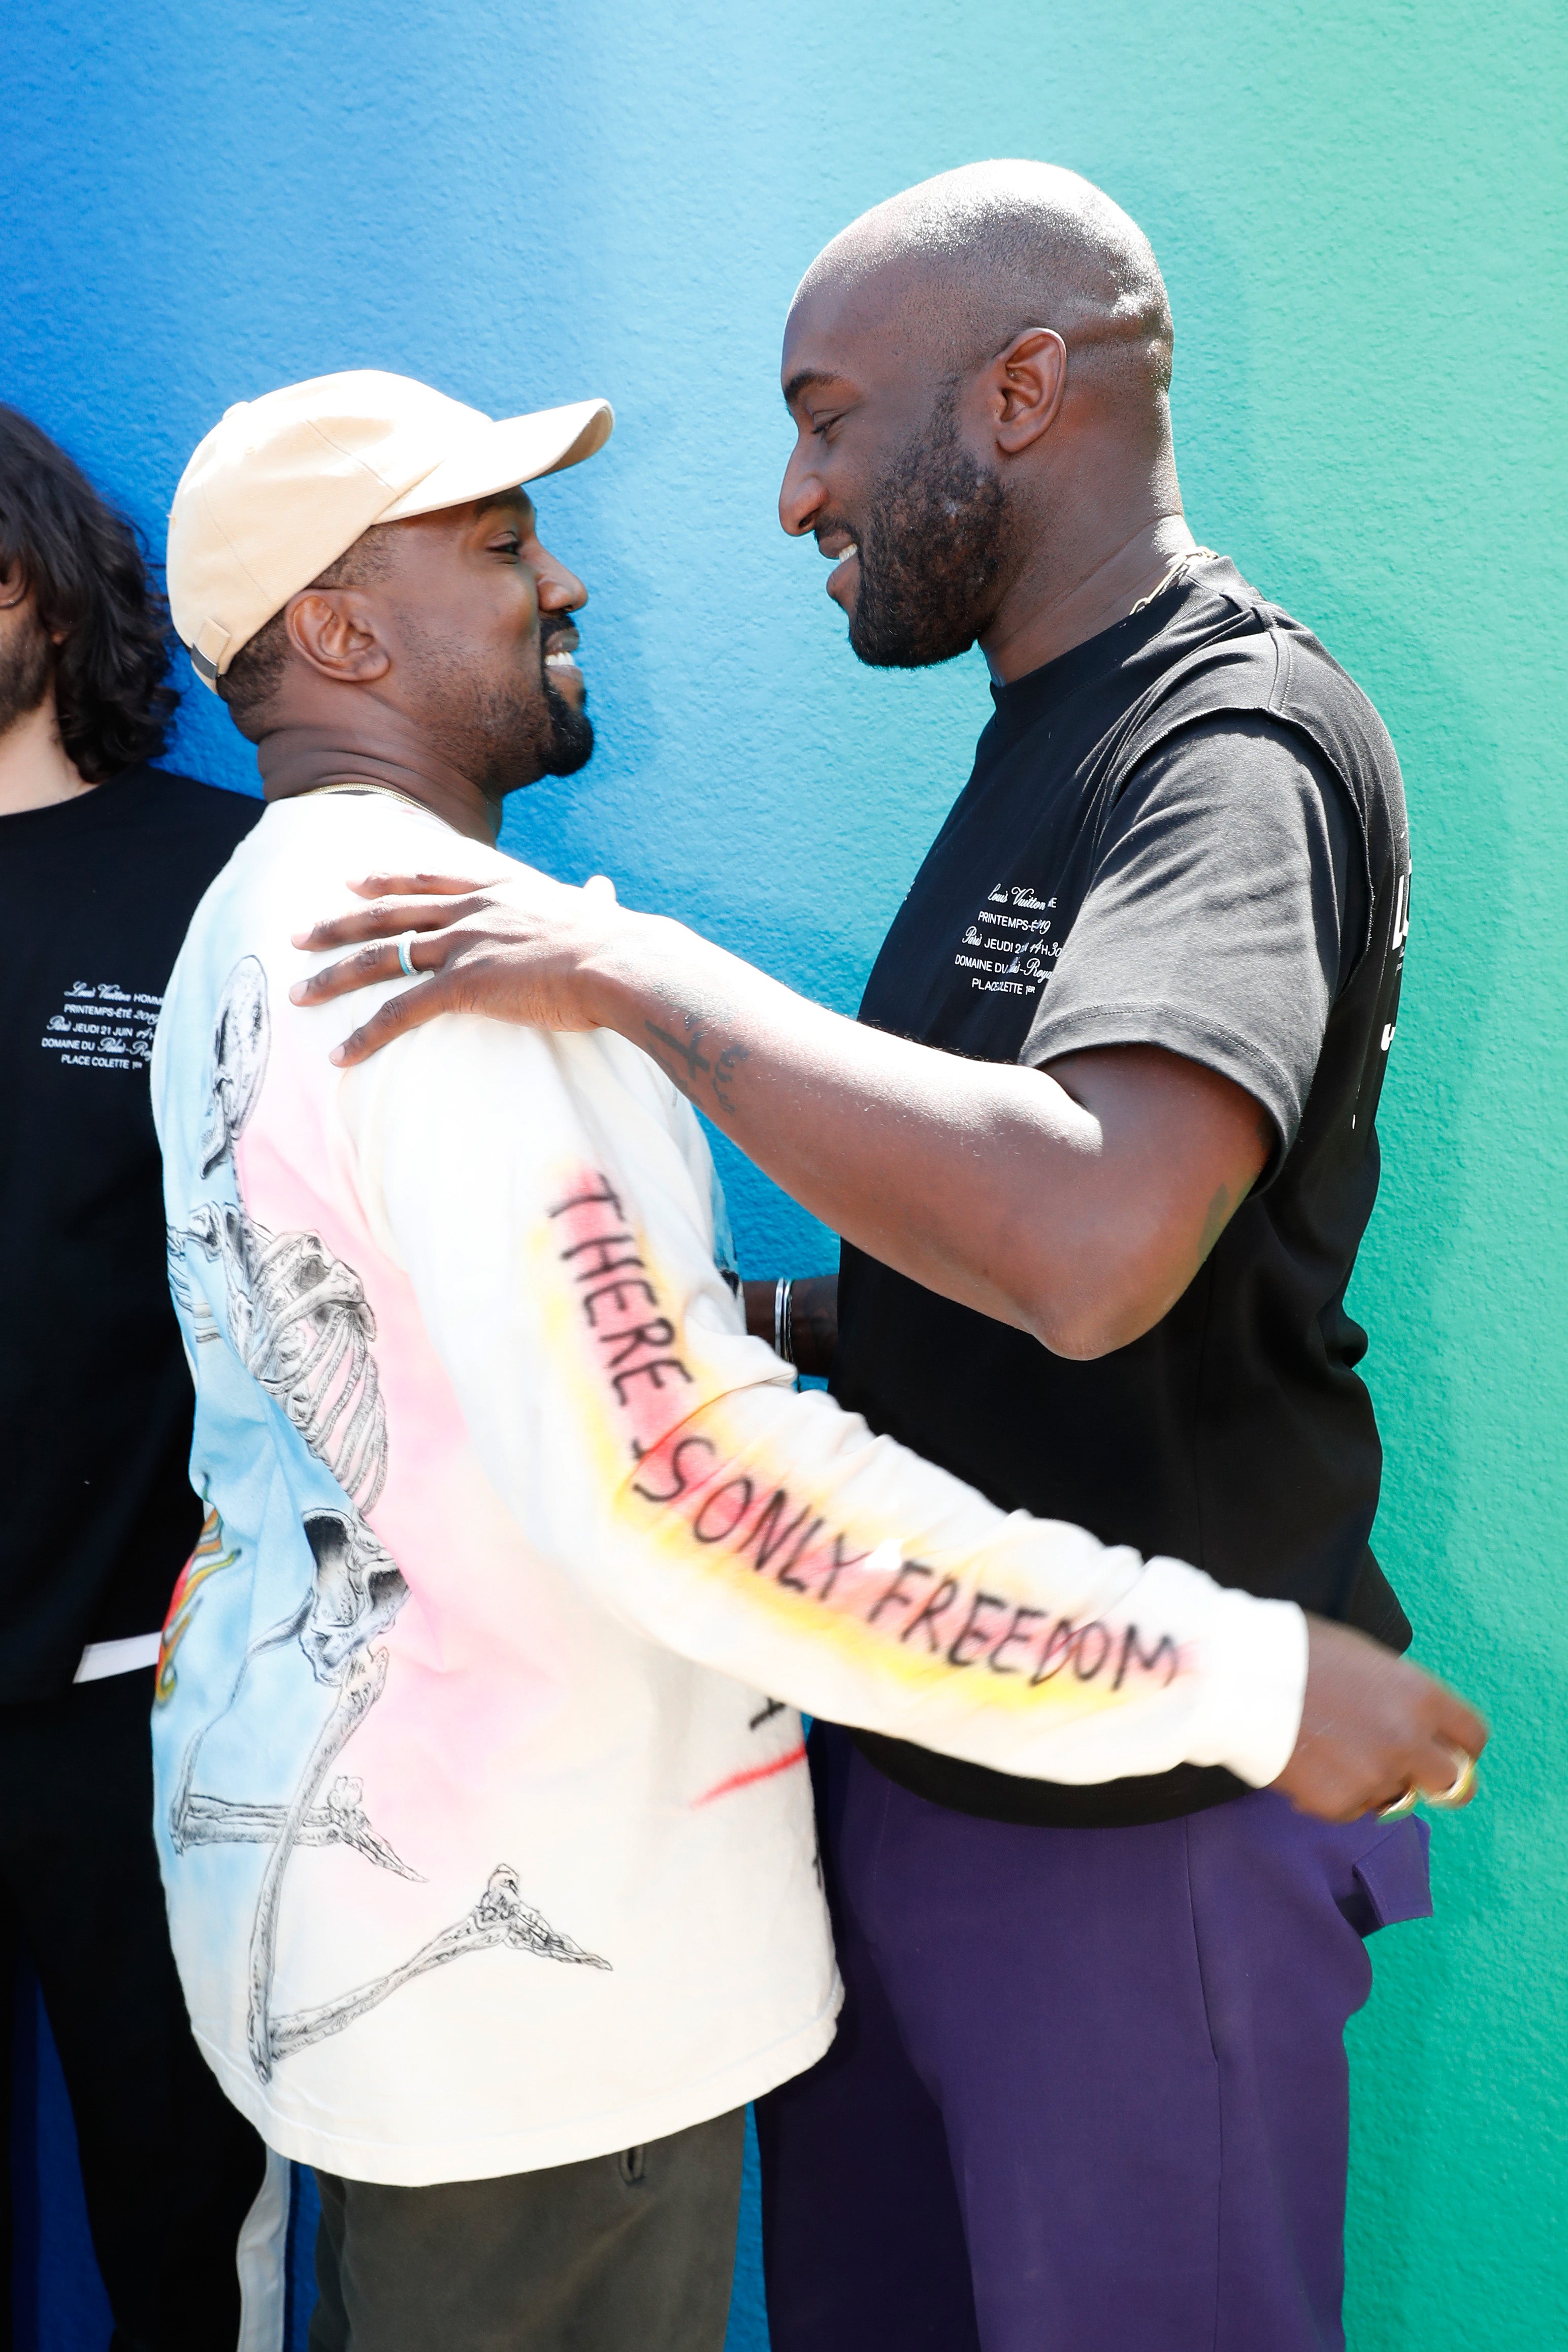 Kanye West Reveals He Almost Signed a Deal With Louis Vuitton